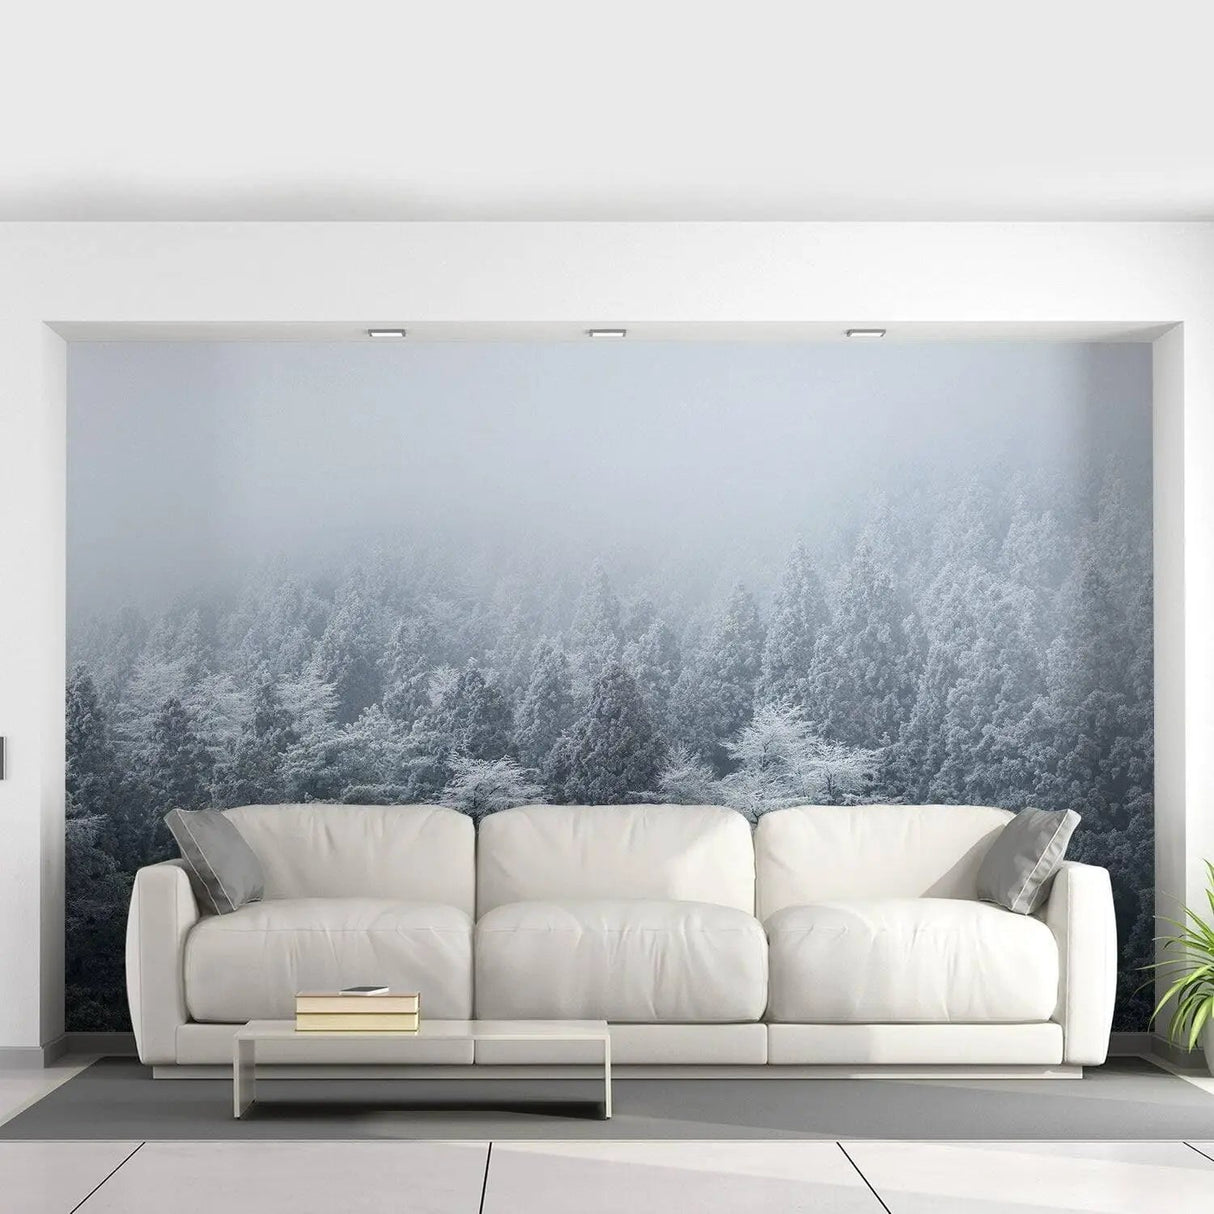 Foggy Forest Wallpaper Sticker Mural - Mountain Tree Fog Removable Wall Paper Art Decal - Large Bedroom Decor Misty Pine Hill Peel Stick - Decords